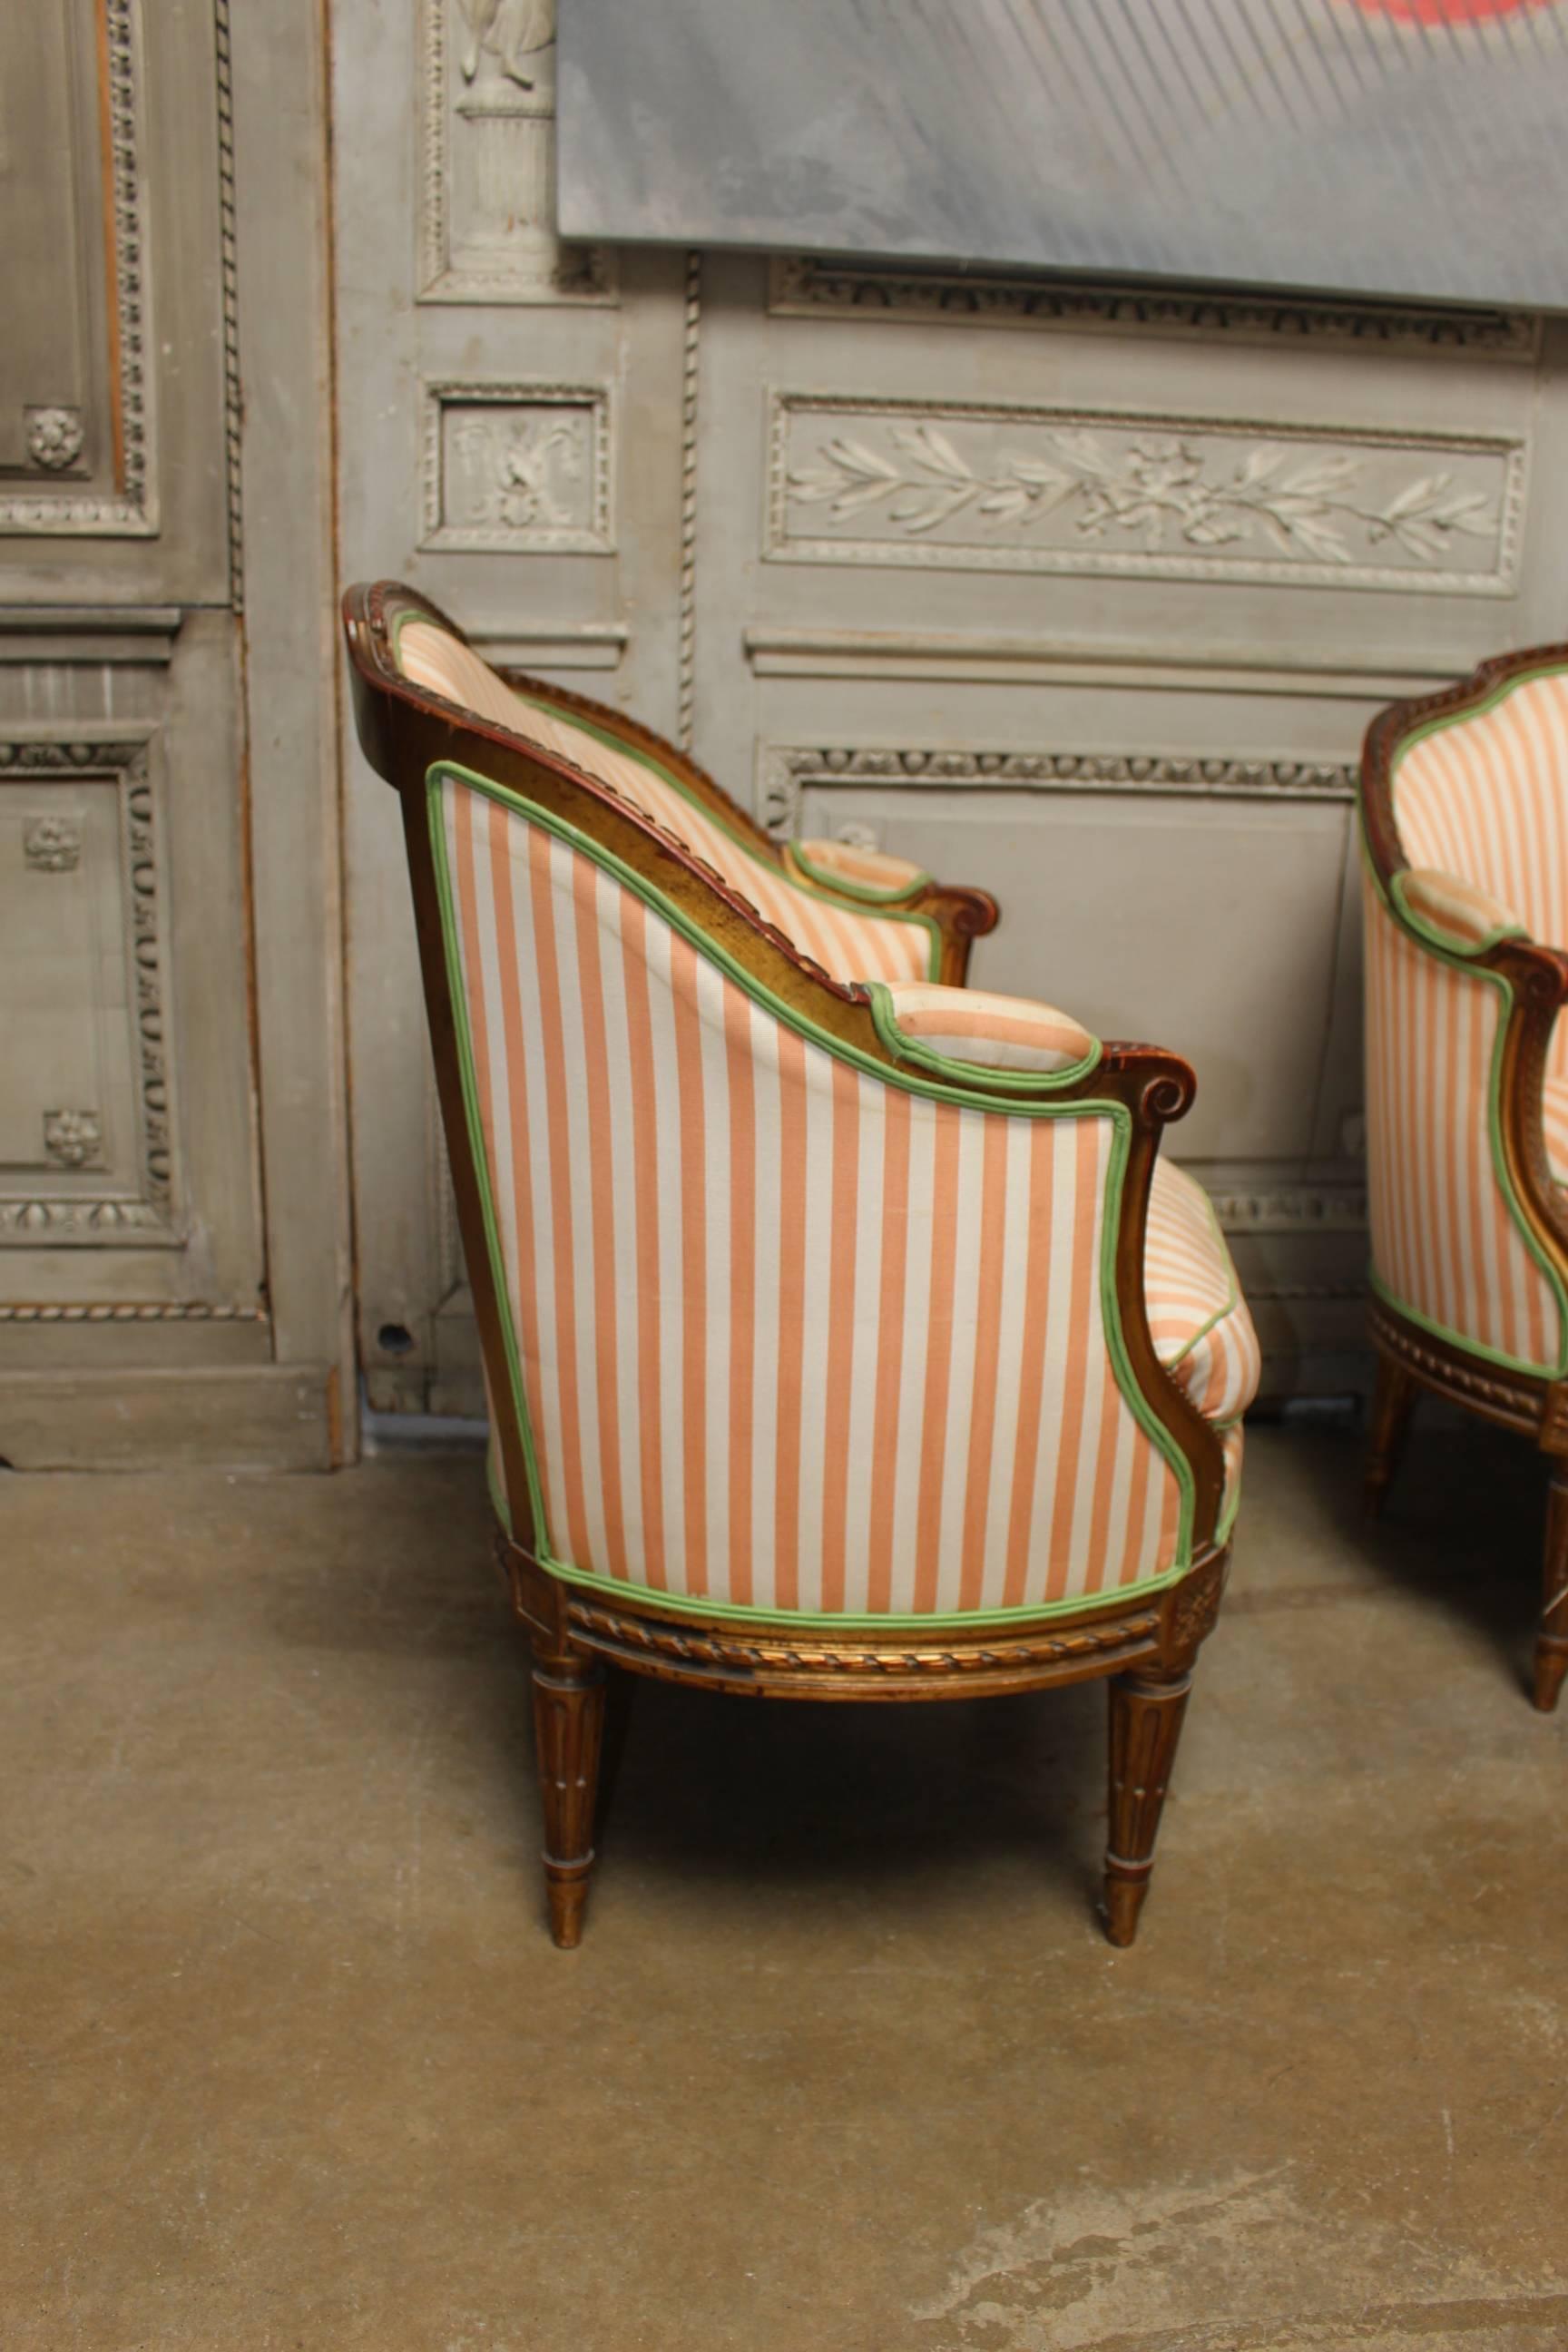 Carved Pair of 19th Century French Louis XVI Style Armchairs with a Gold Leaf Finish For Sale